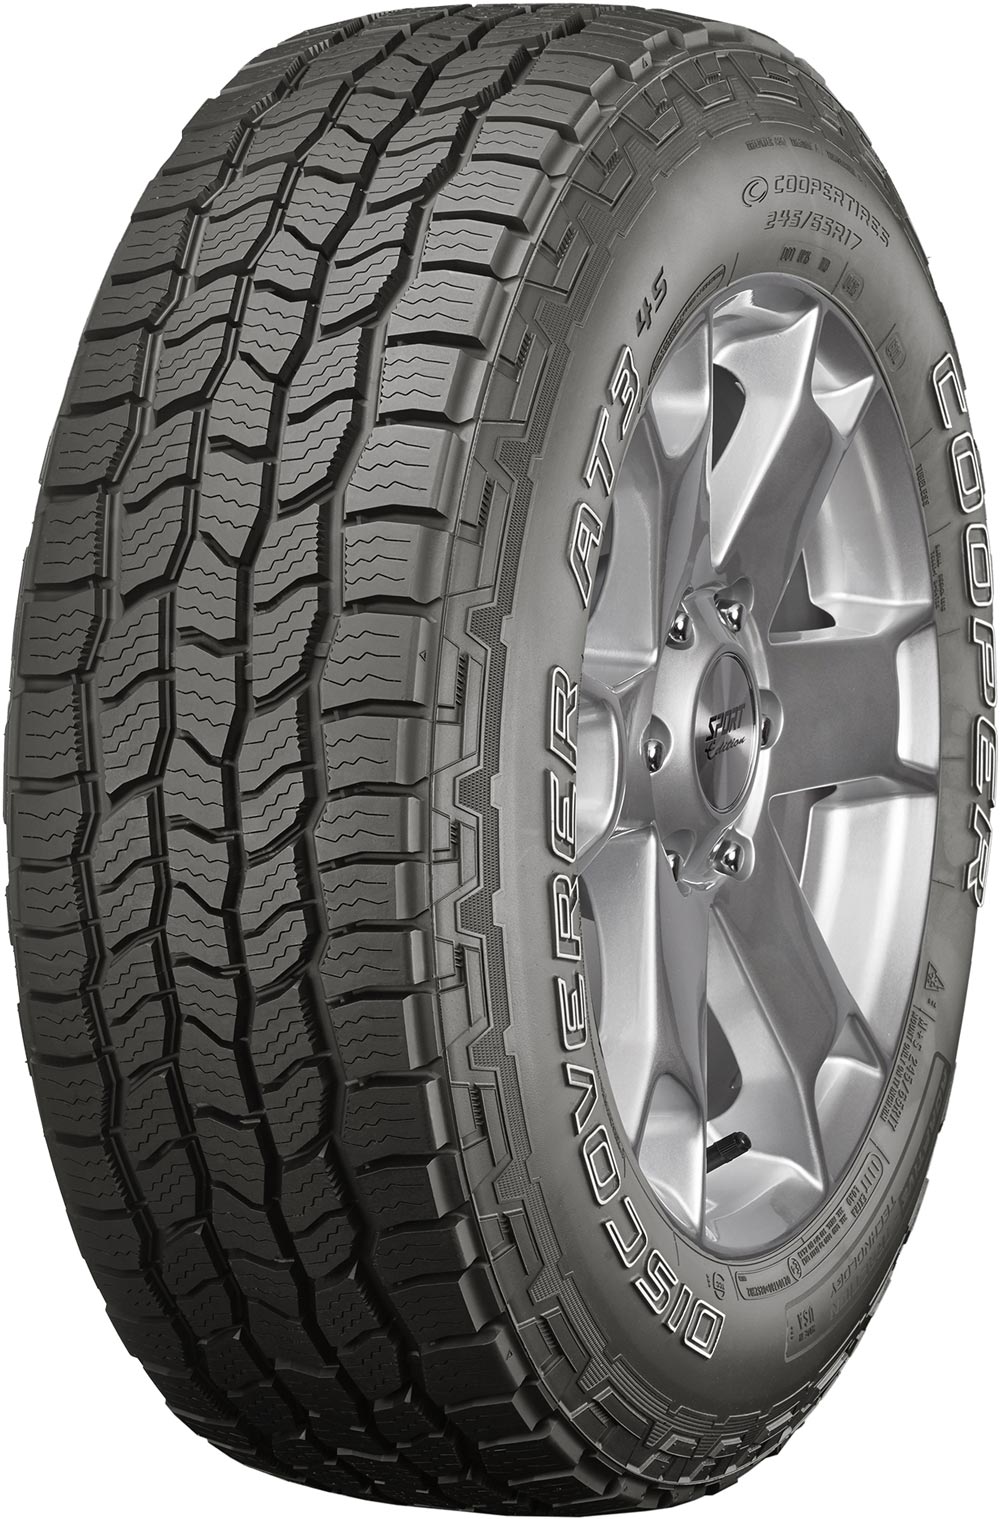 Гуми за джип COOPER DISCOVERER AT3 4S OWL 235/75 R15 105T